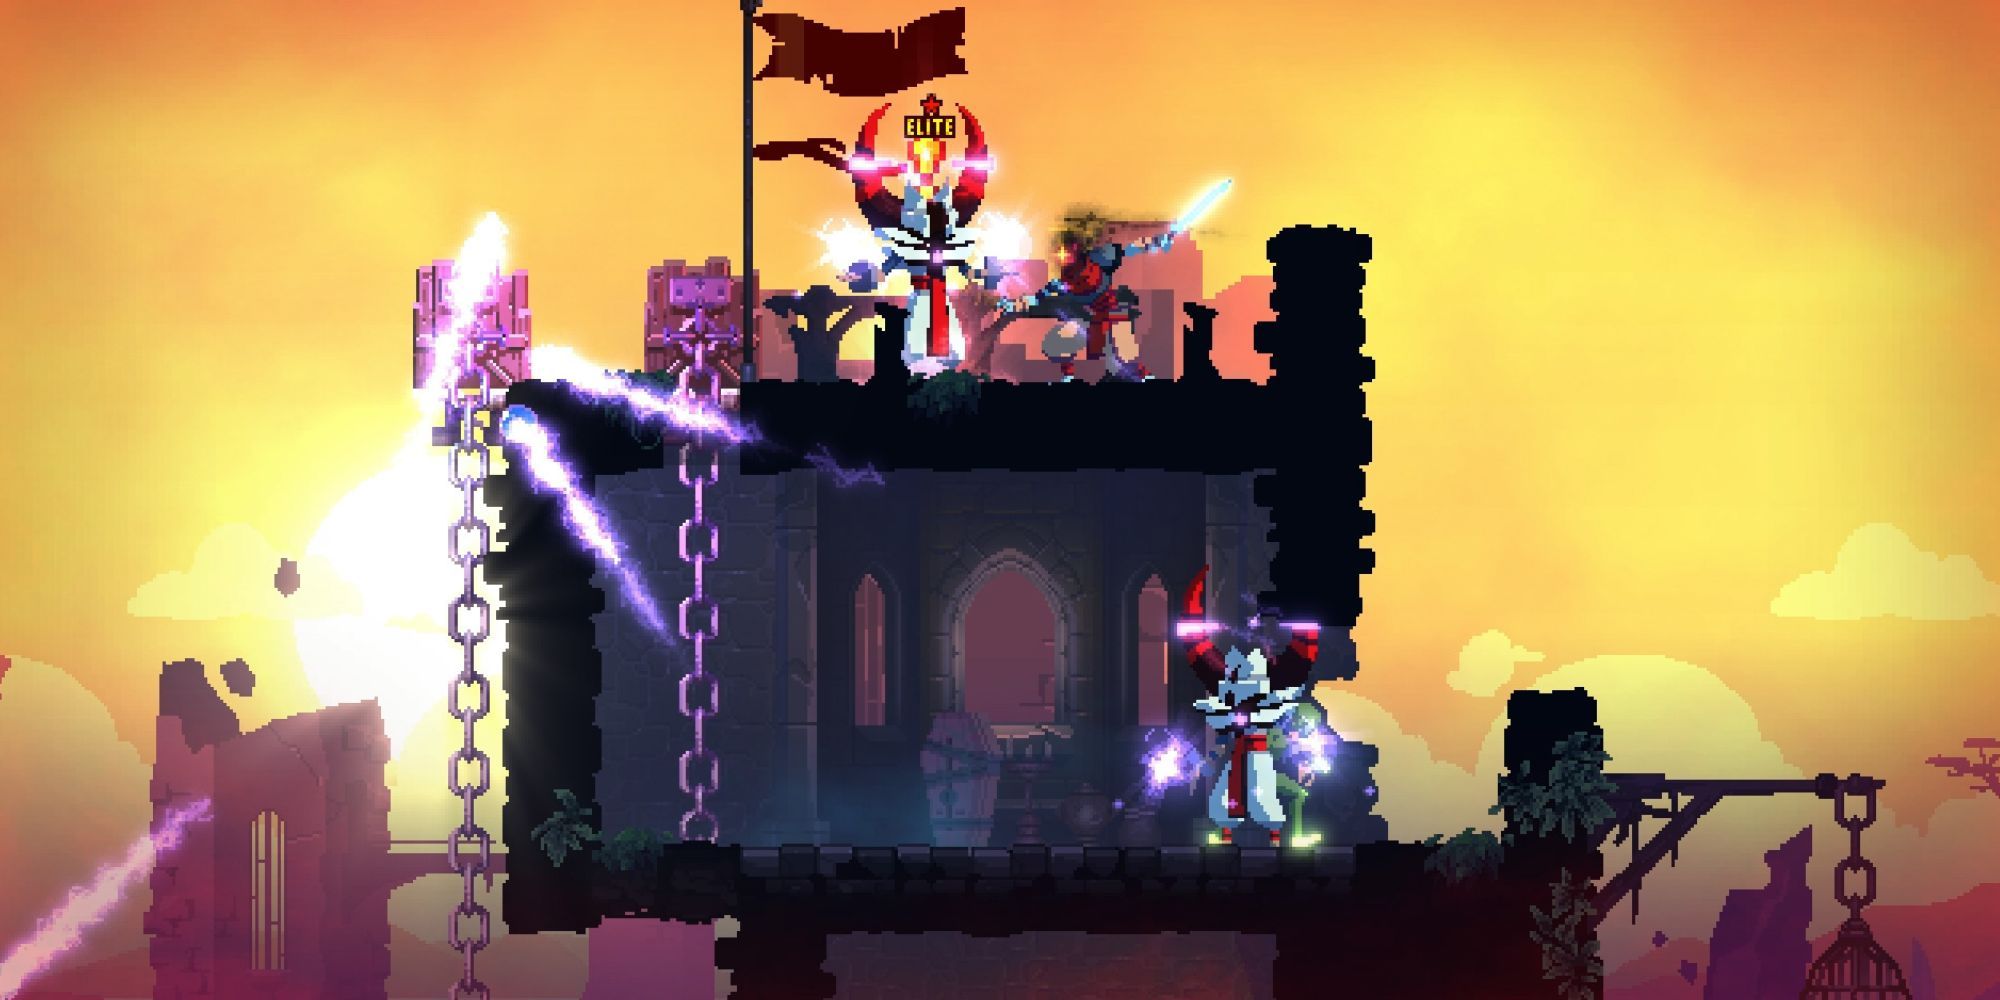 Dead cells character fighting baddies on a castle